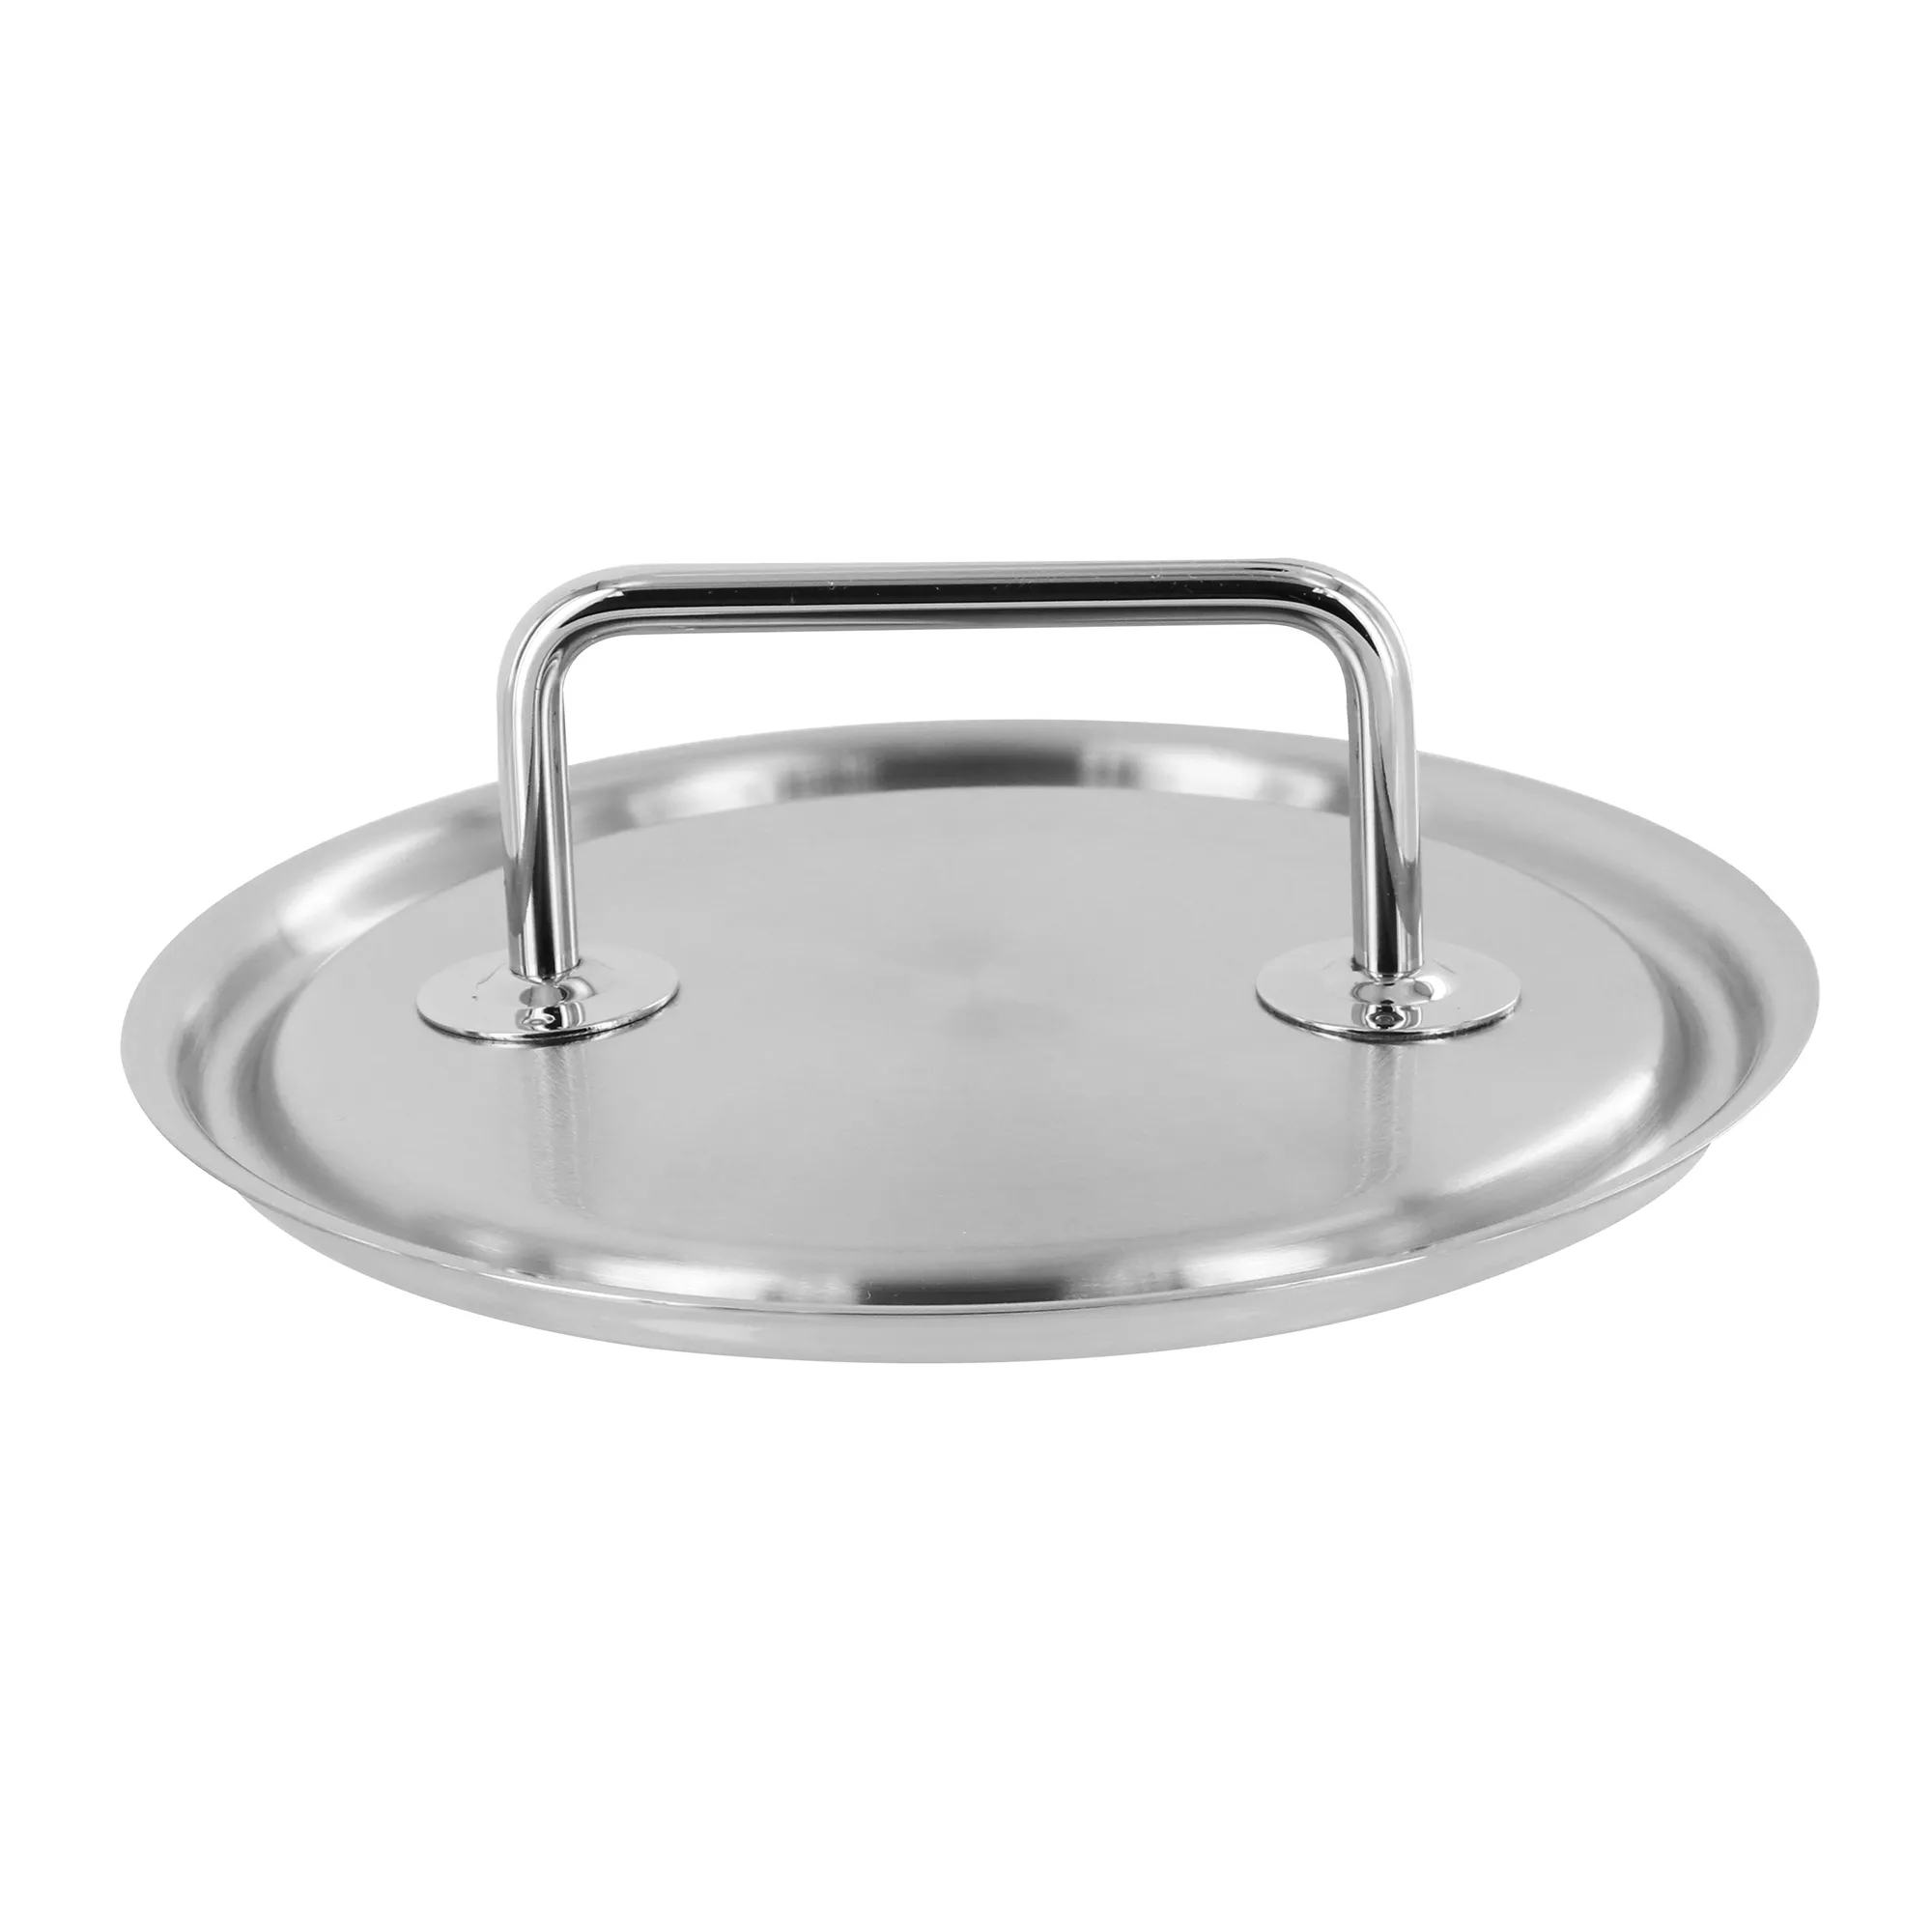 https://www.homethreads.com/files/zwilling/65100-918-zwilling-commercial-7-inch-stainless-steel-lid.webp